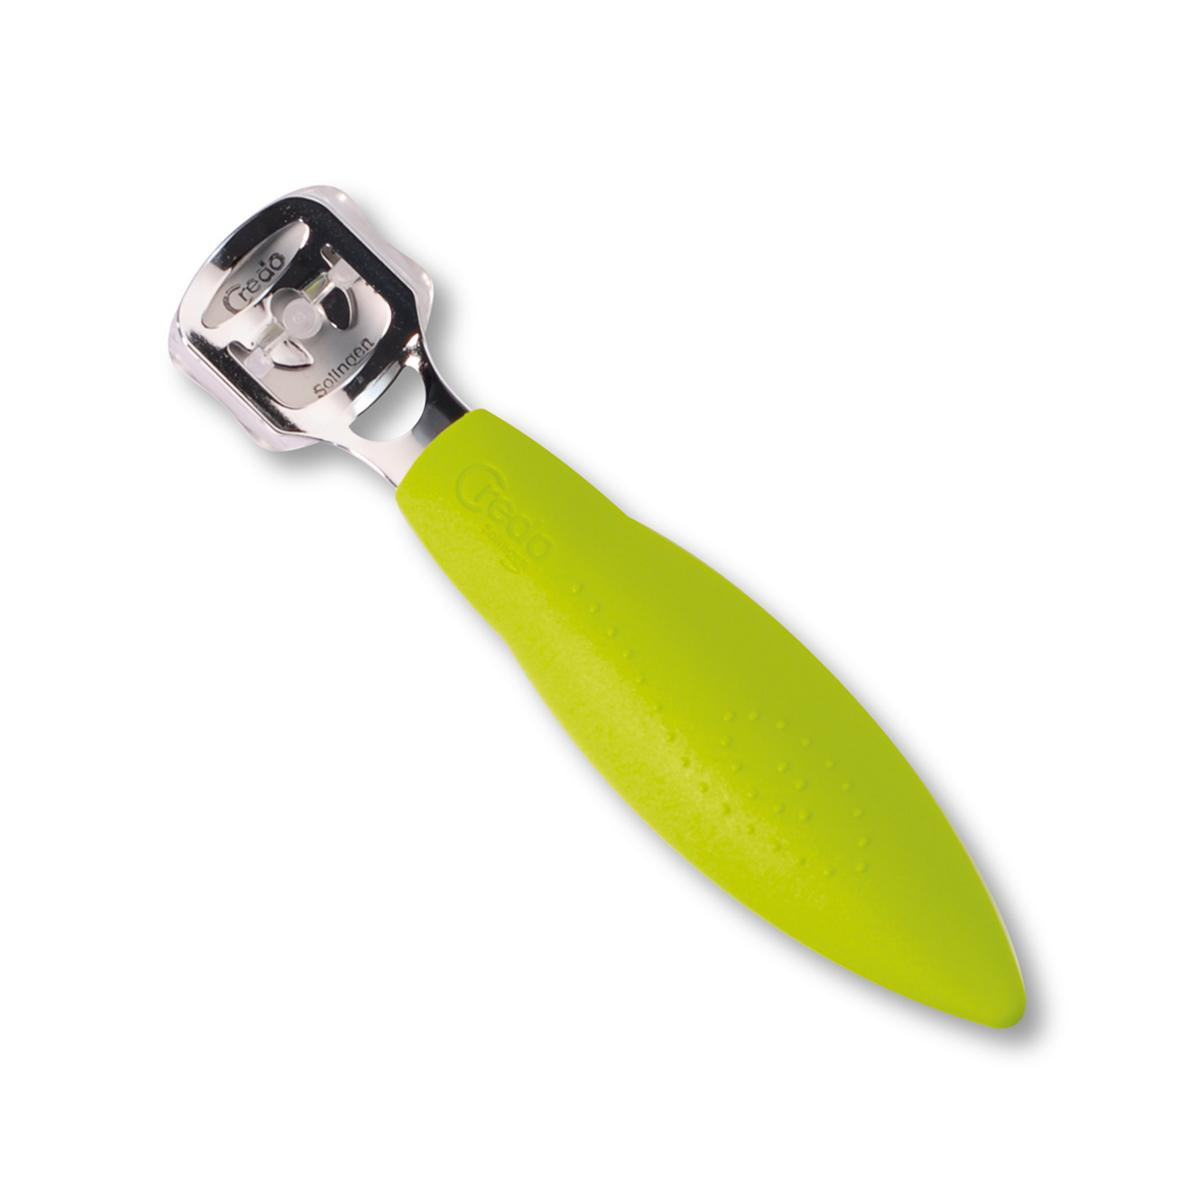 Primary image of Green Pop Art Safety Corn Cutter